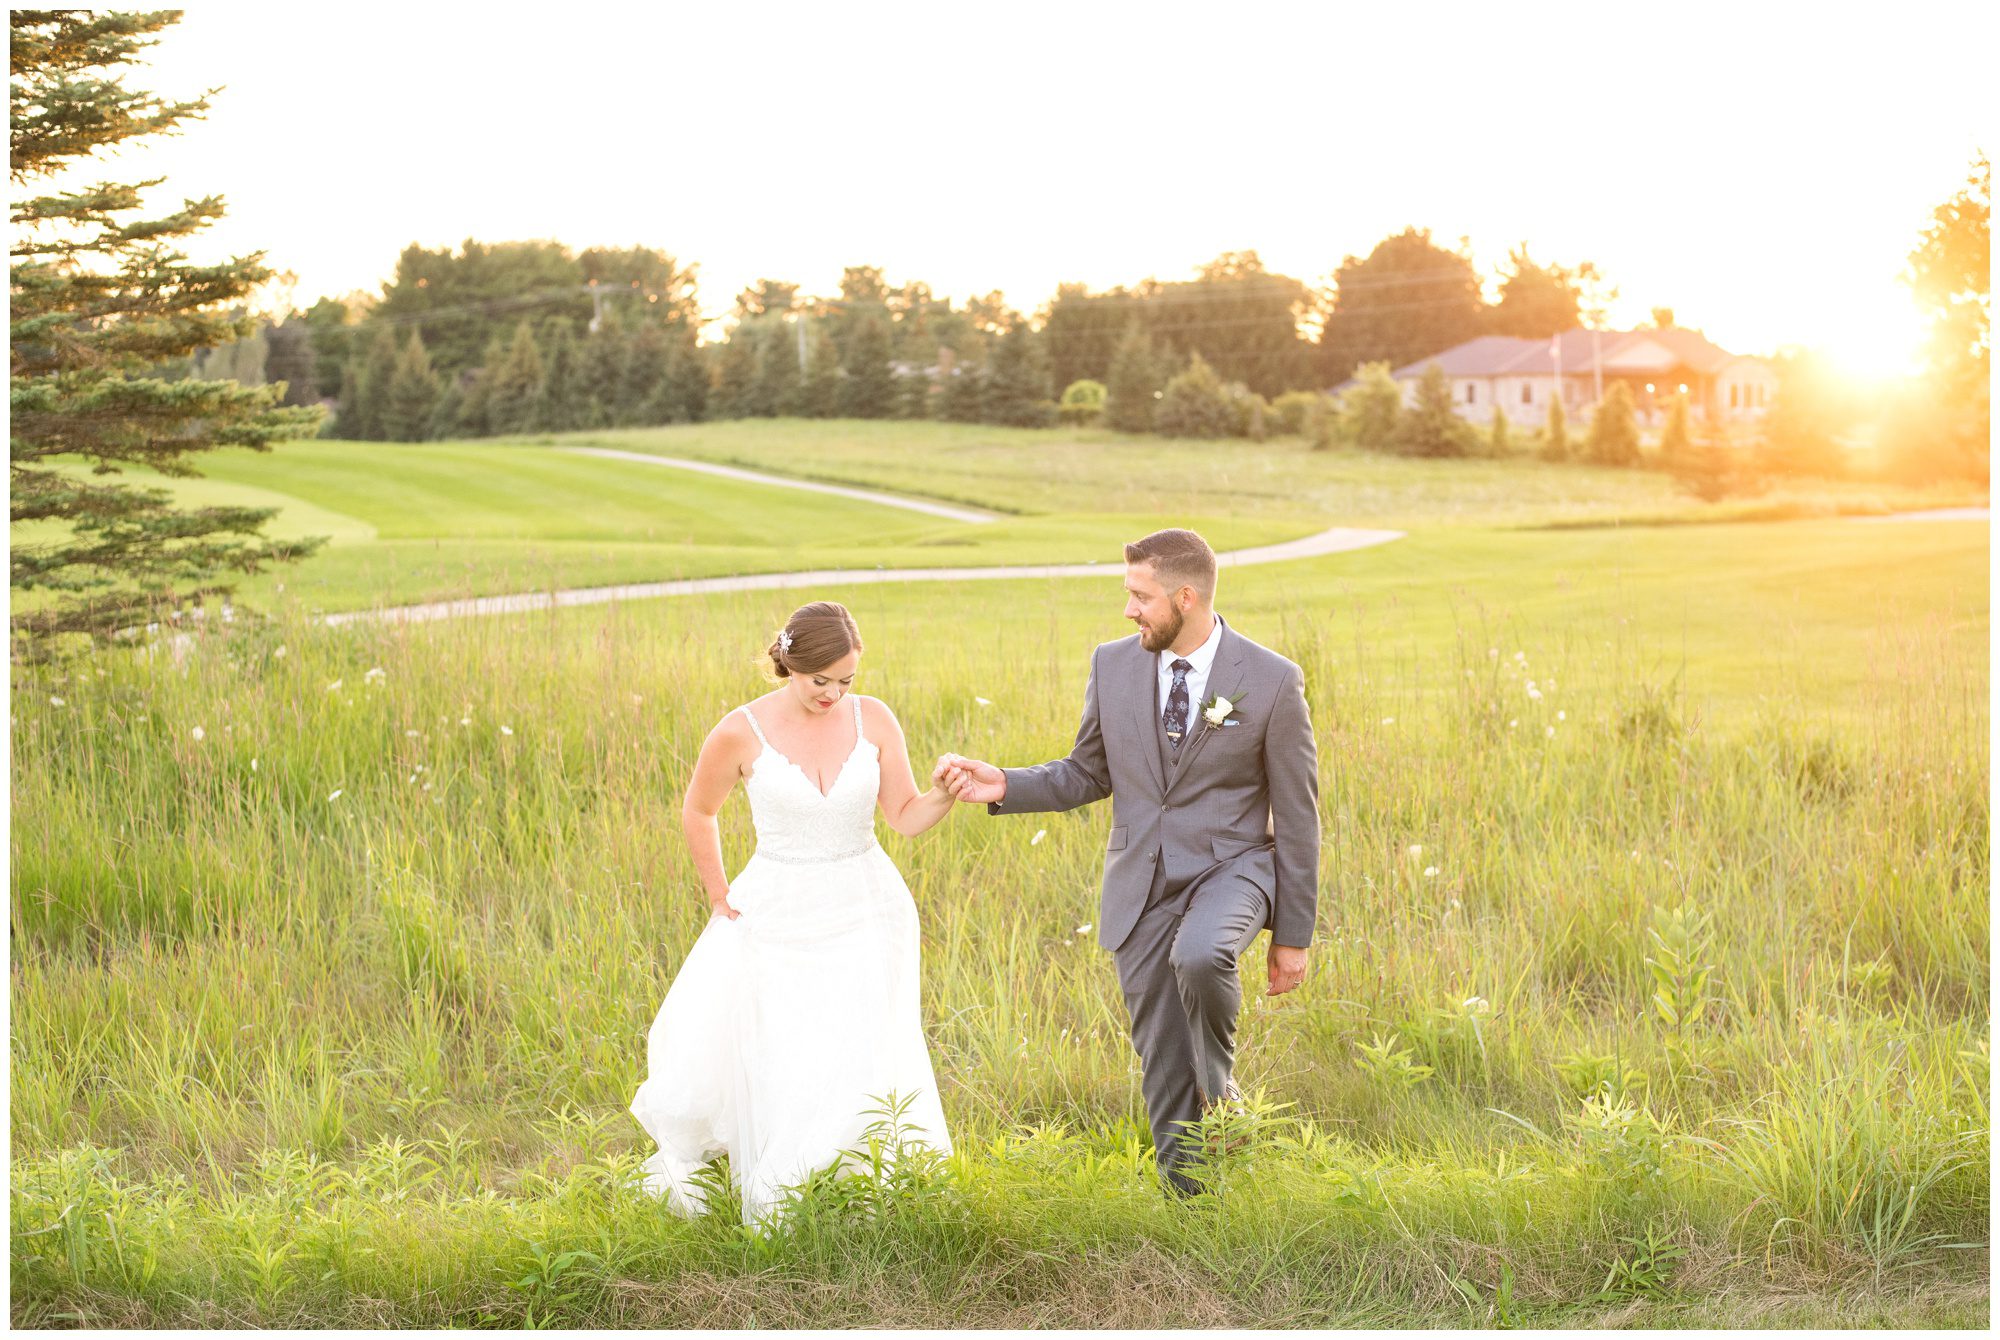 Bride and groom walking hand in hand through field at golden hour